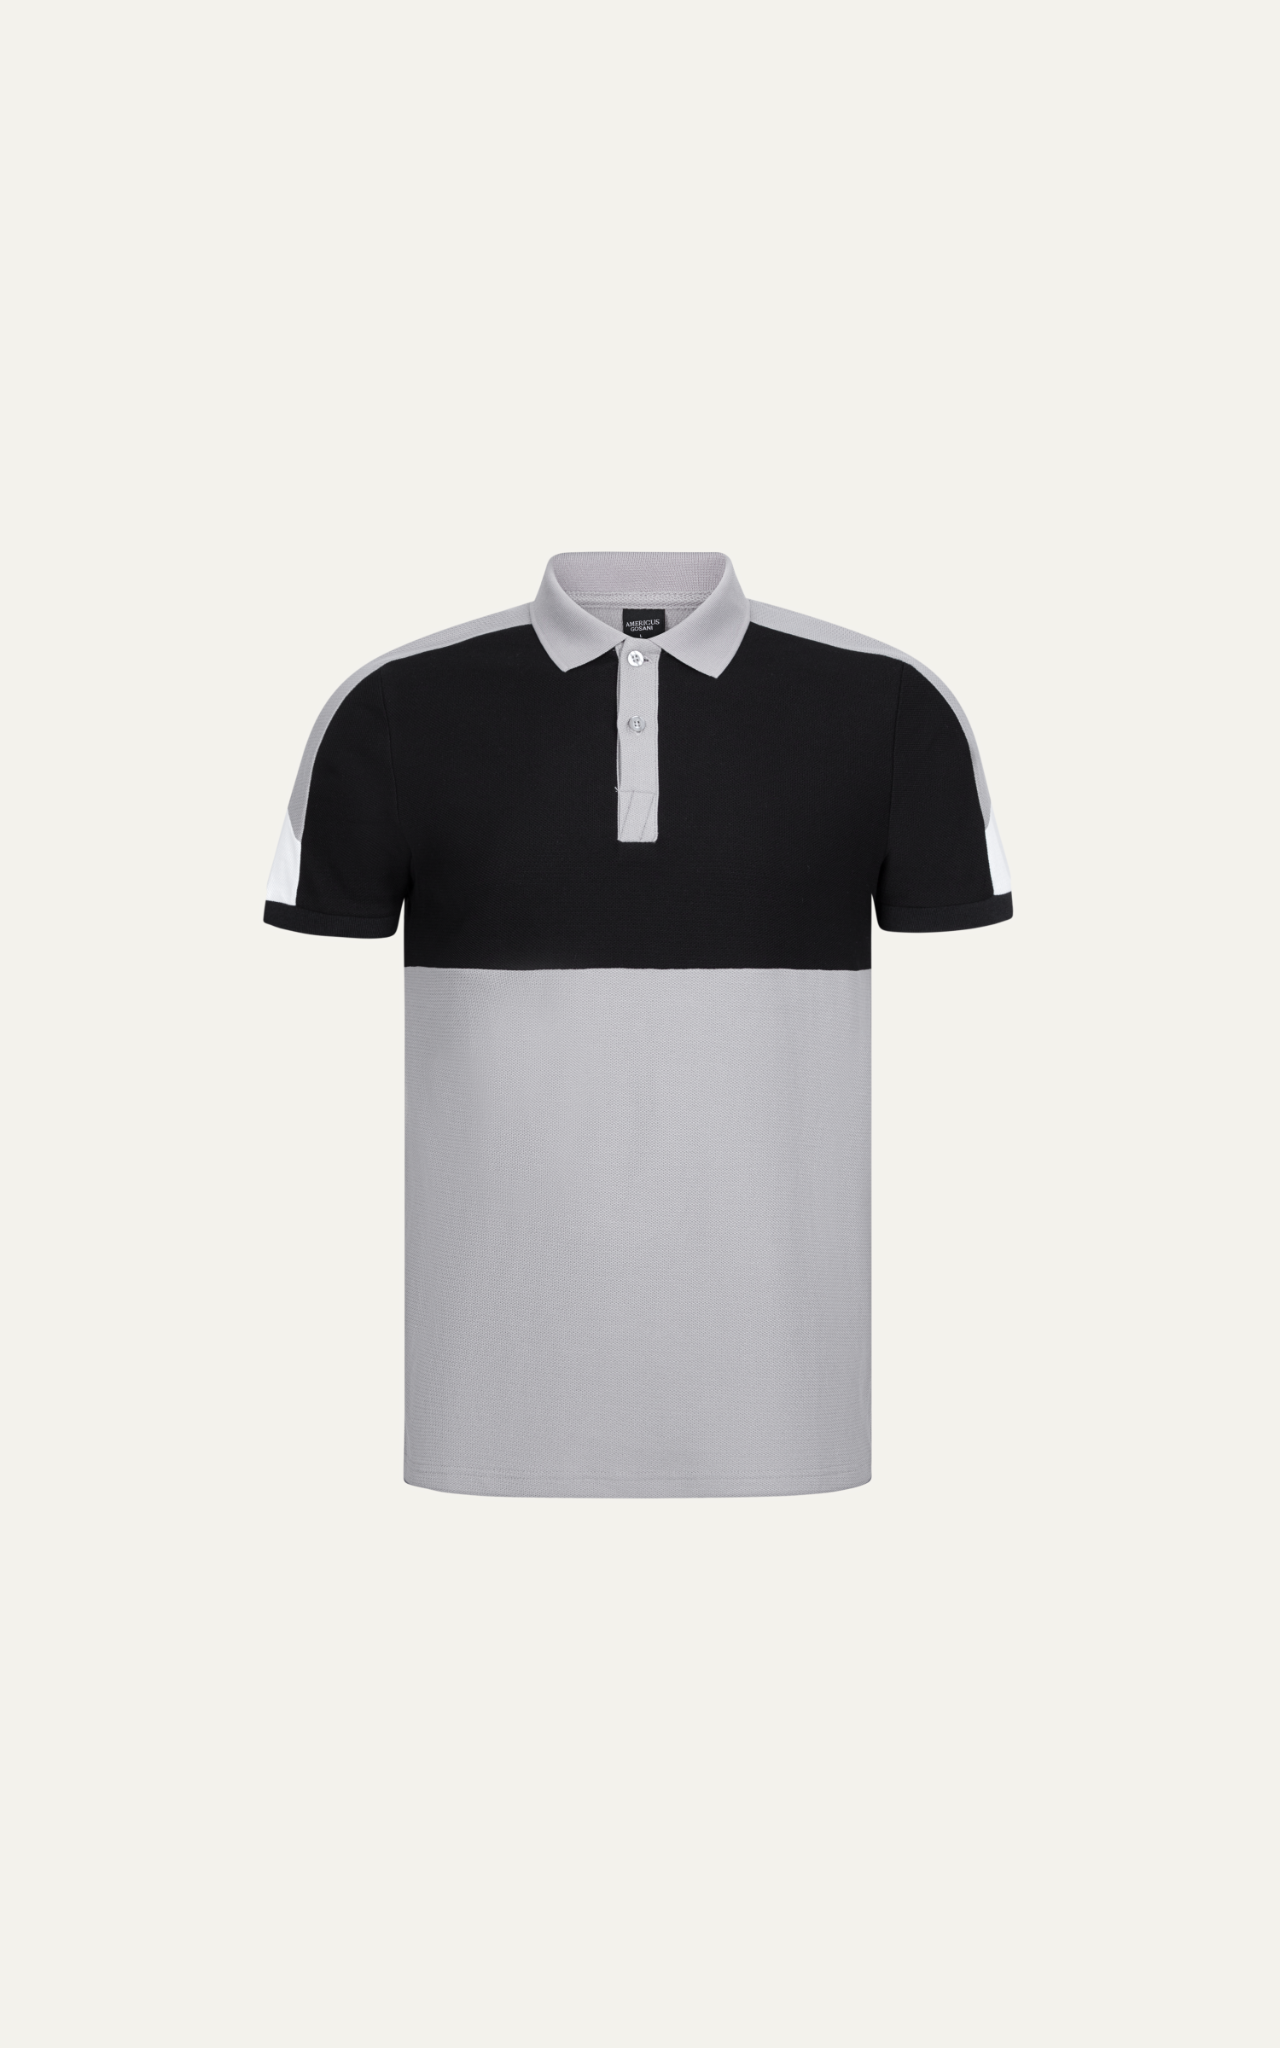 T69 FACTORY SLIMFIT STRIPED POLO - BLACK